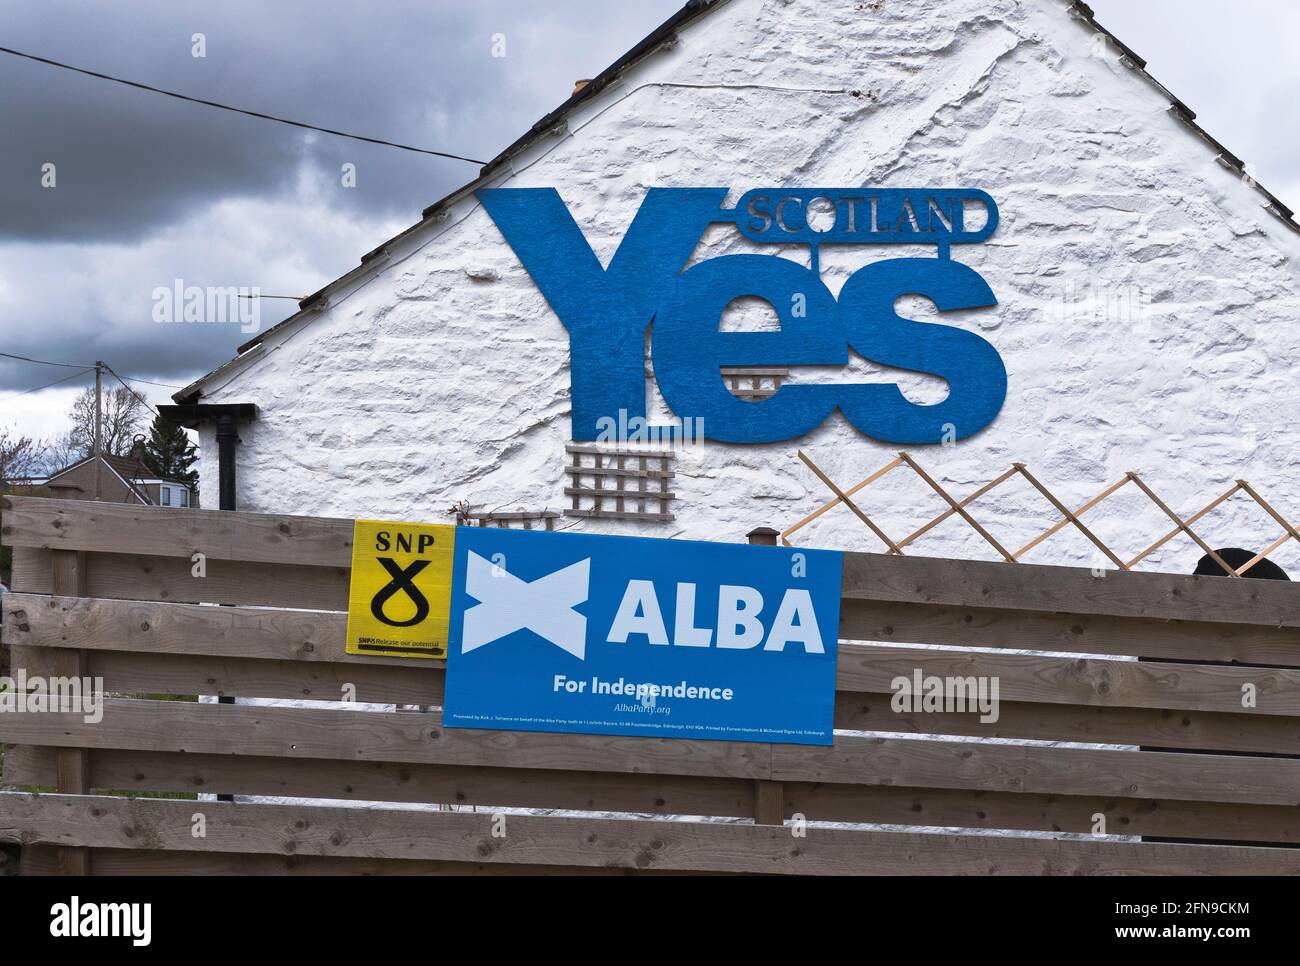 dh Scottish independence SCOTLAND UK Scottish YES supporters house referendum supporter houses campaign support signs SNP logo Alba nationalists sign Stock Photo